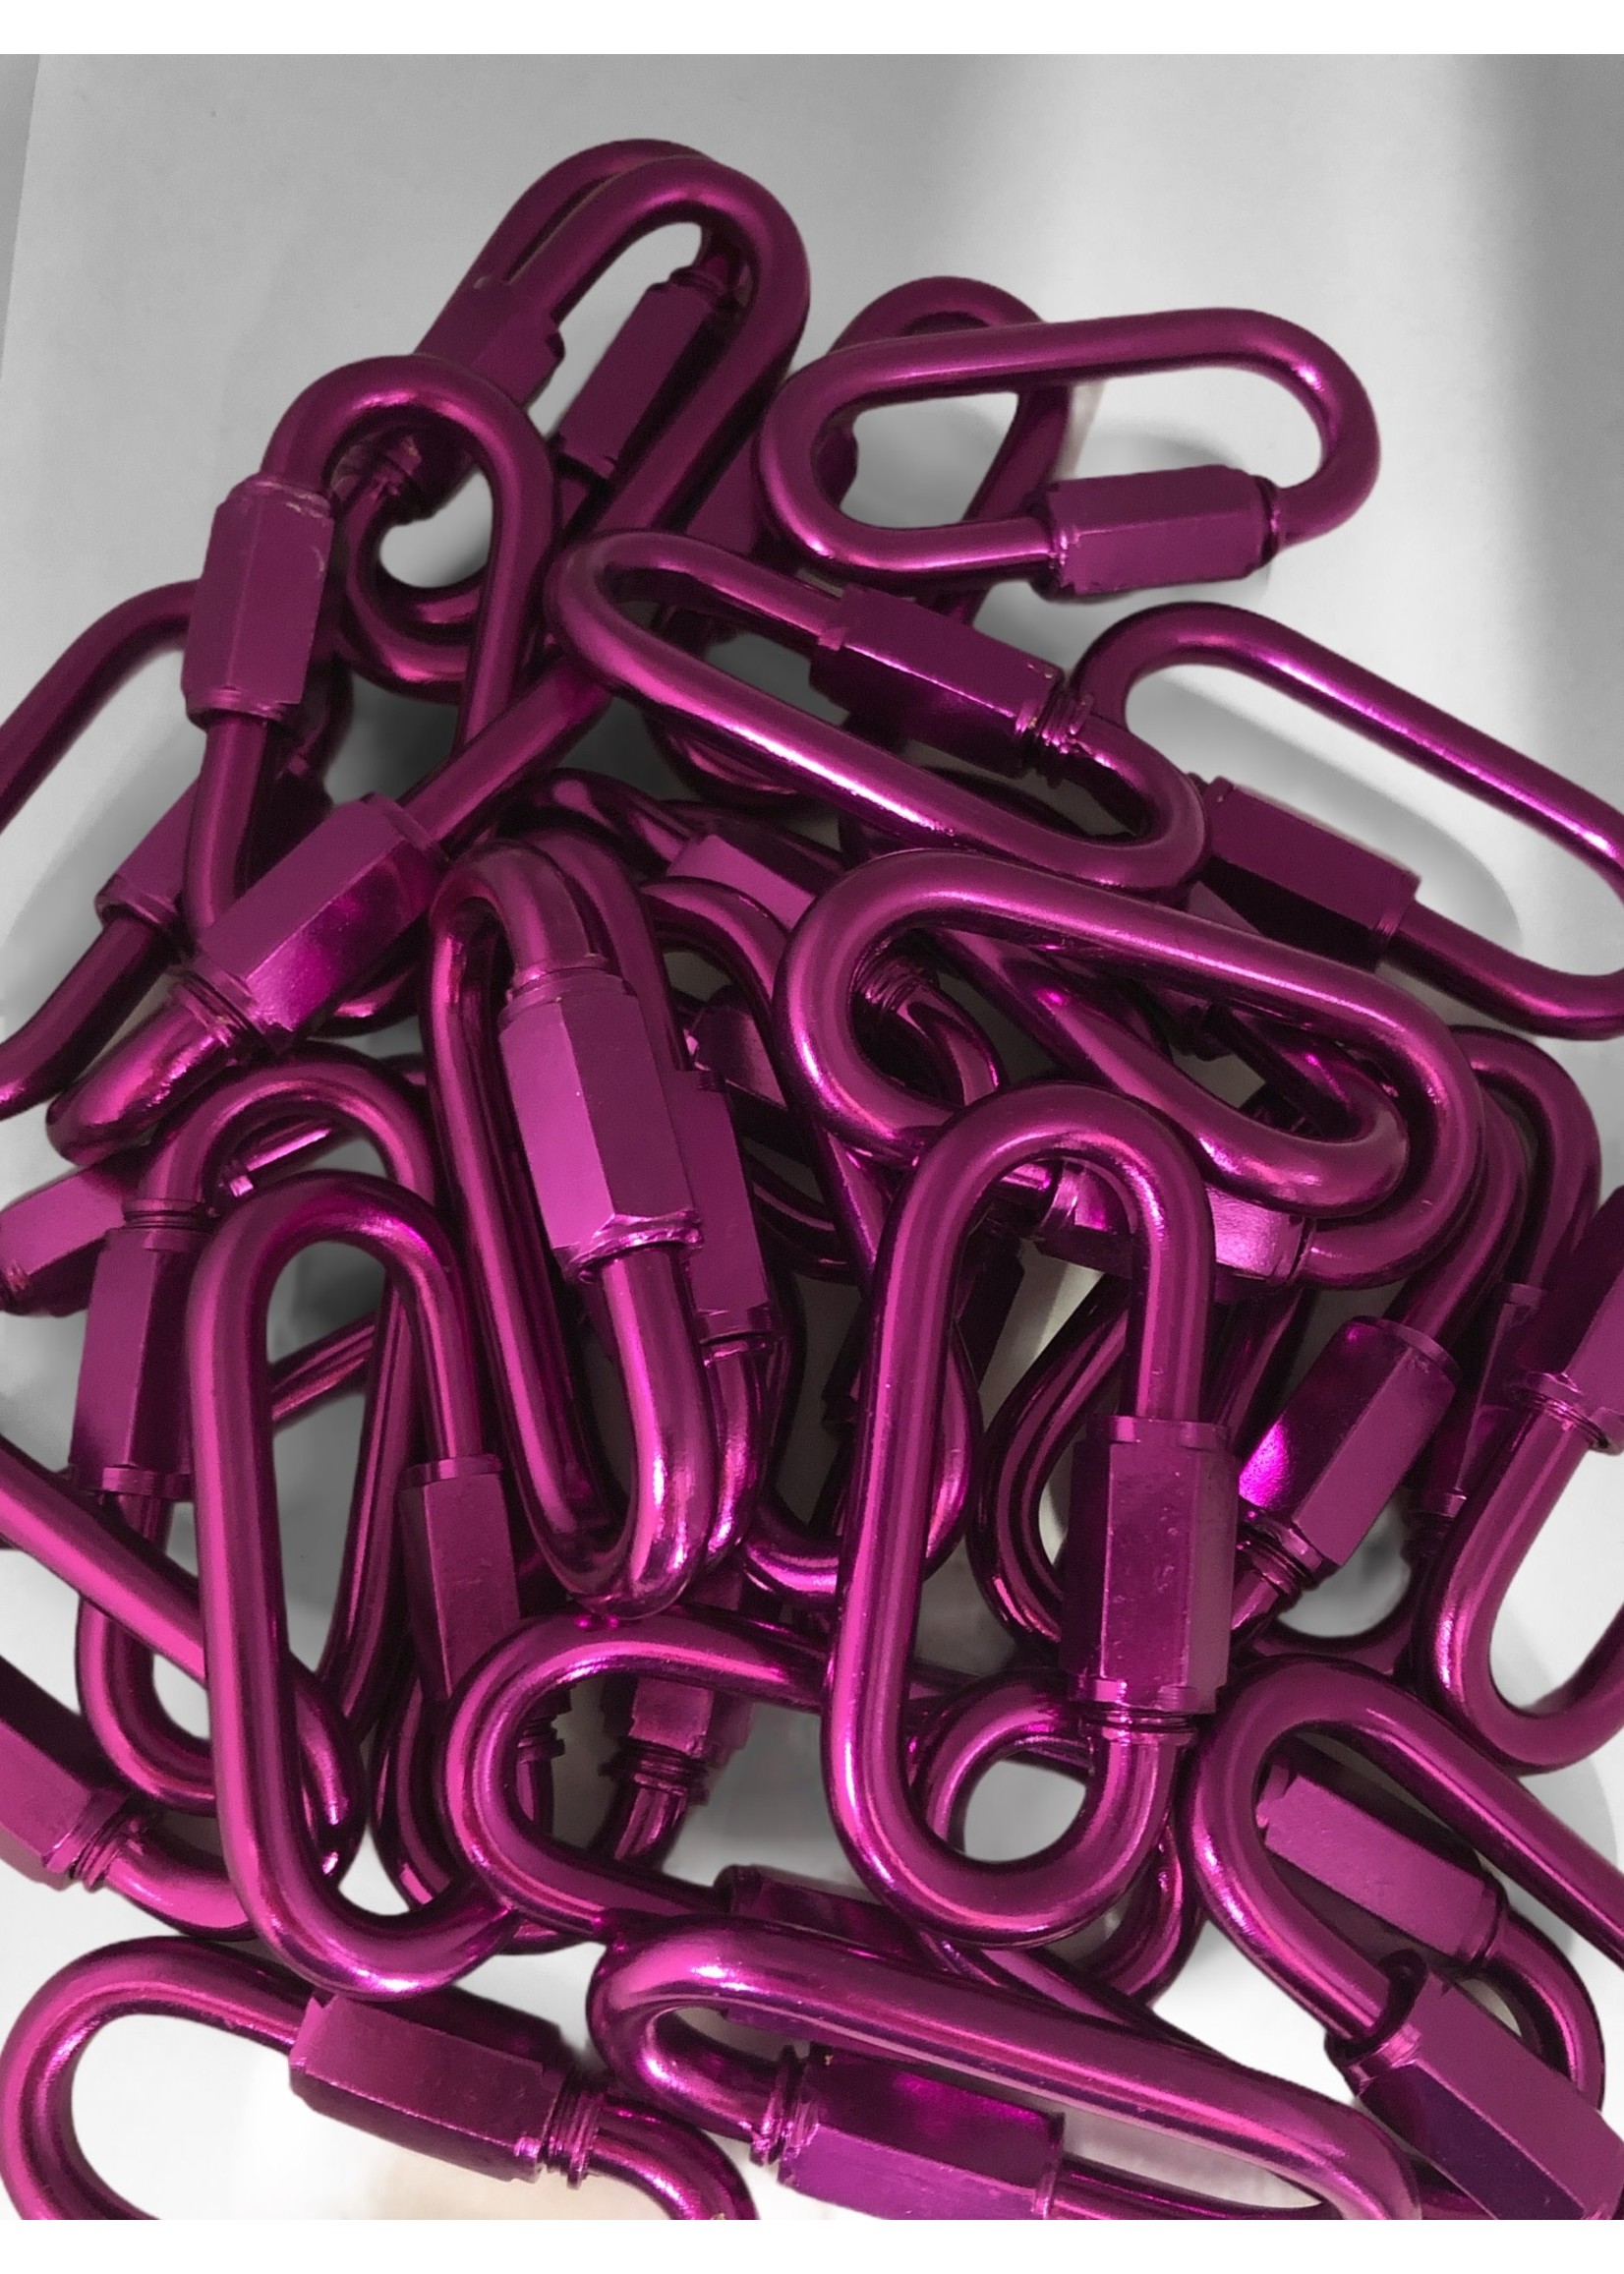 Chirp N Dales Anodized Aluminum Quick Links  2 1/4'' X 1"